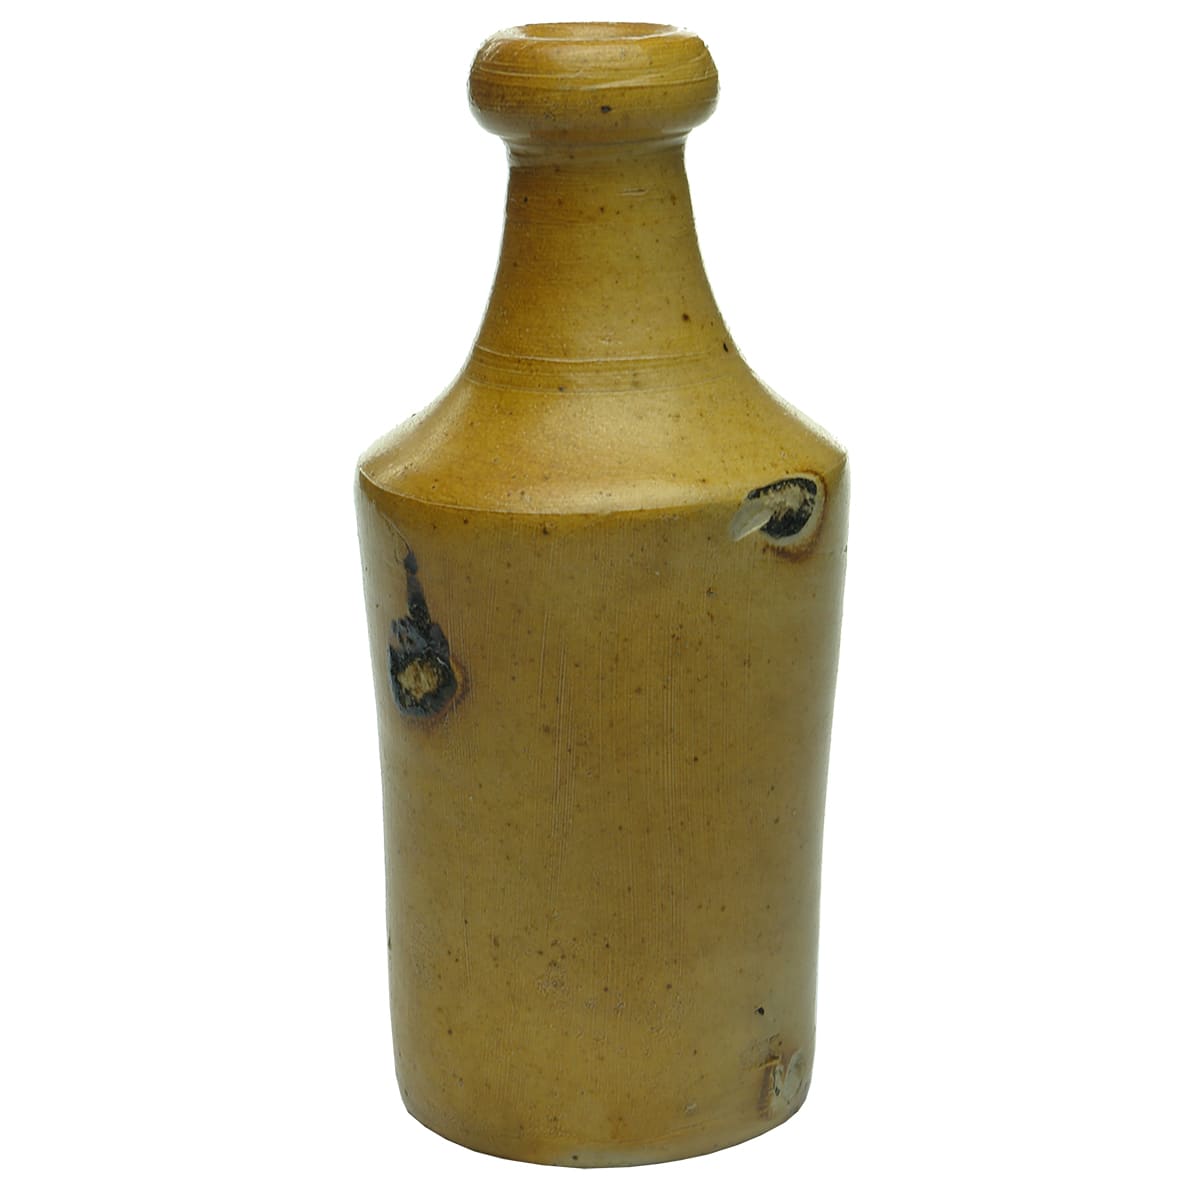 Ginger Beer. EX. Early impressed stoneware.